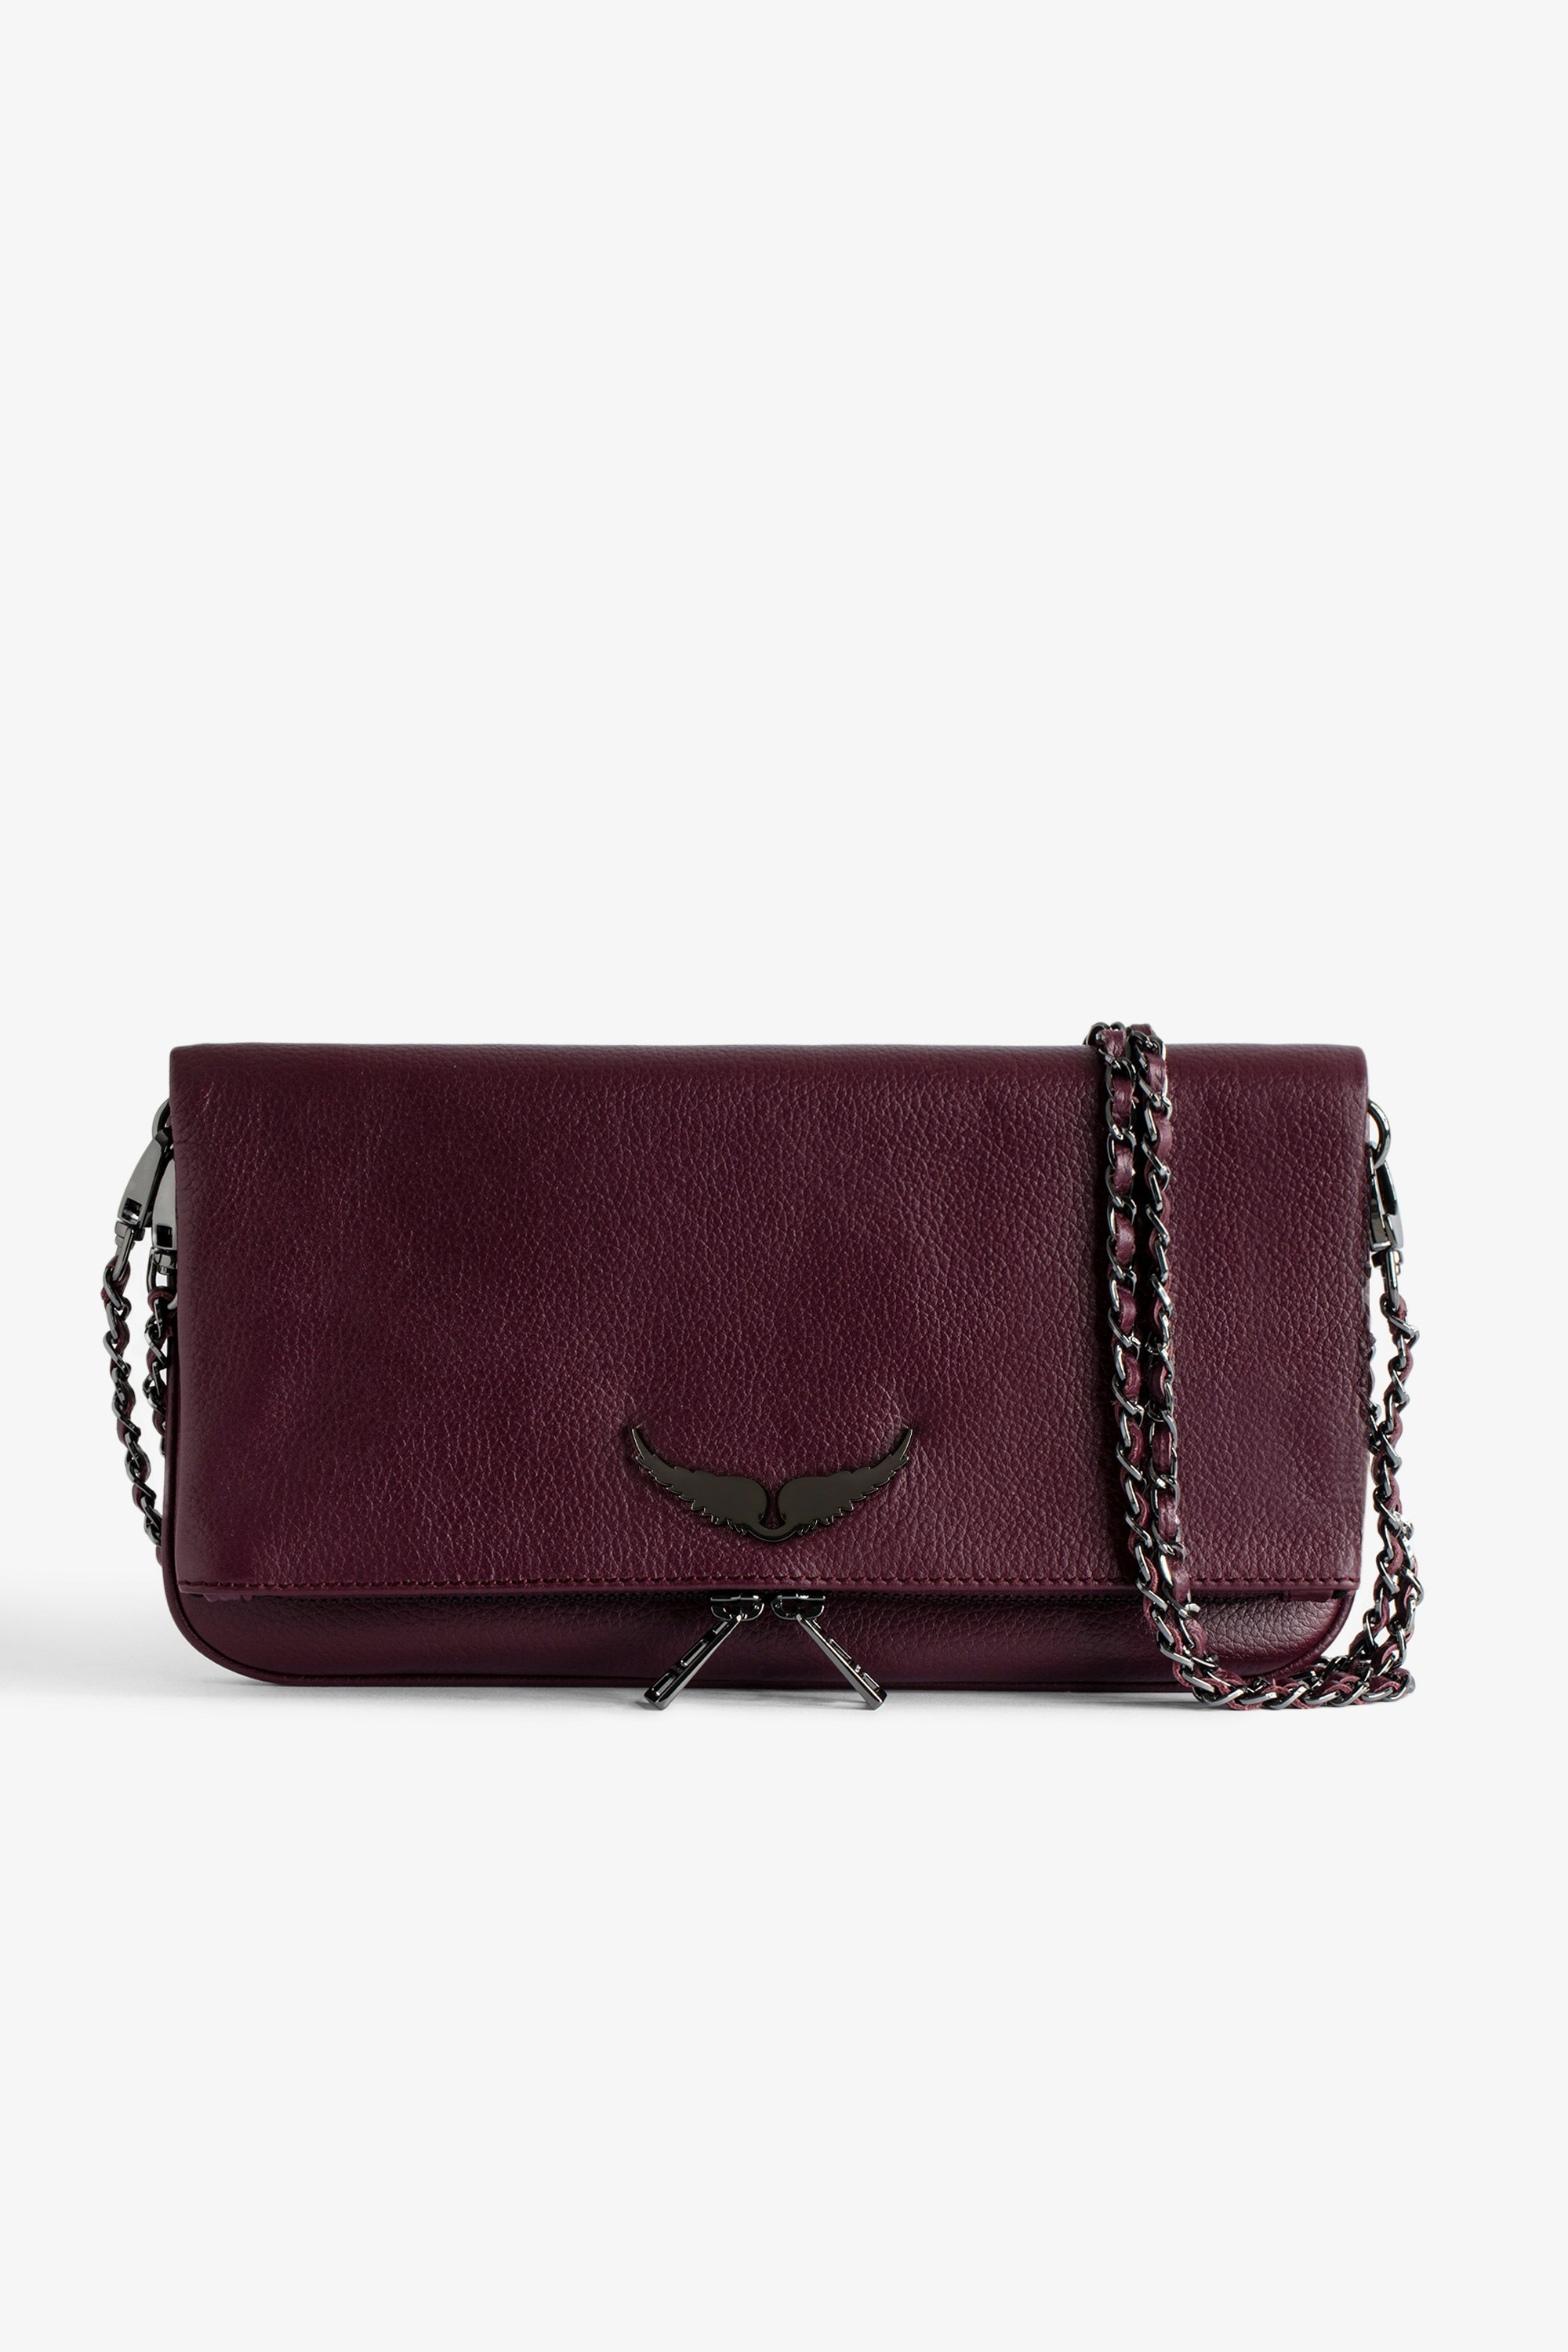 Rock Clutch Women’s burgundy grained leather clutch with double leather and metal chain strap.